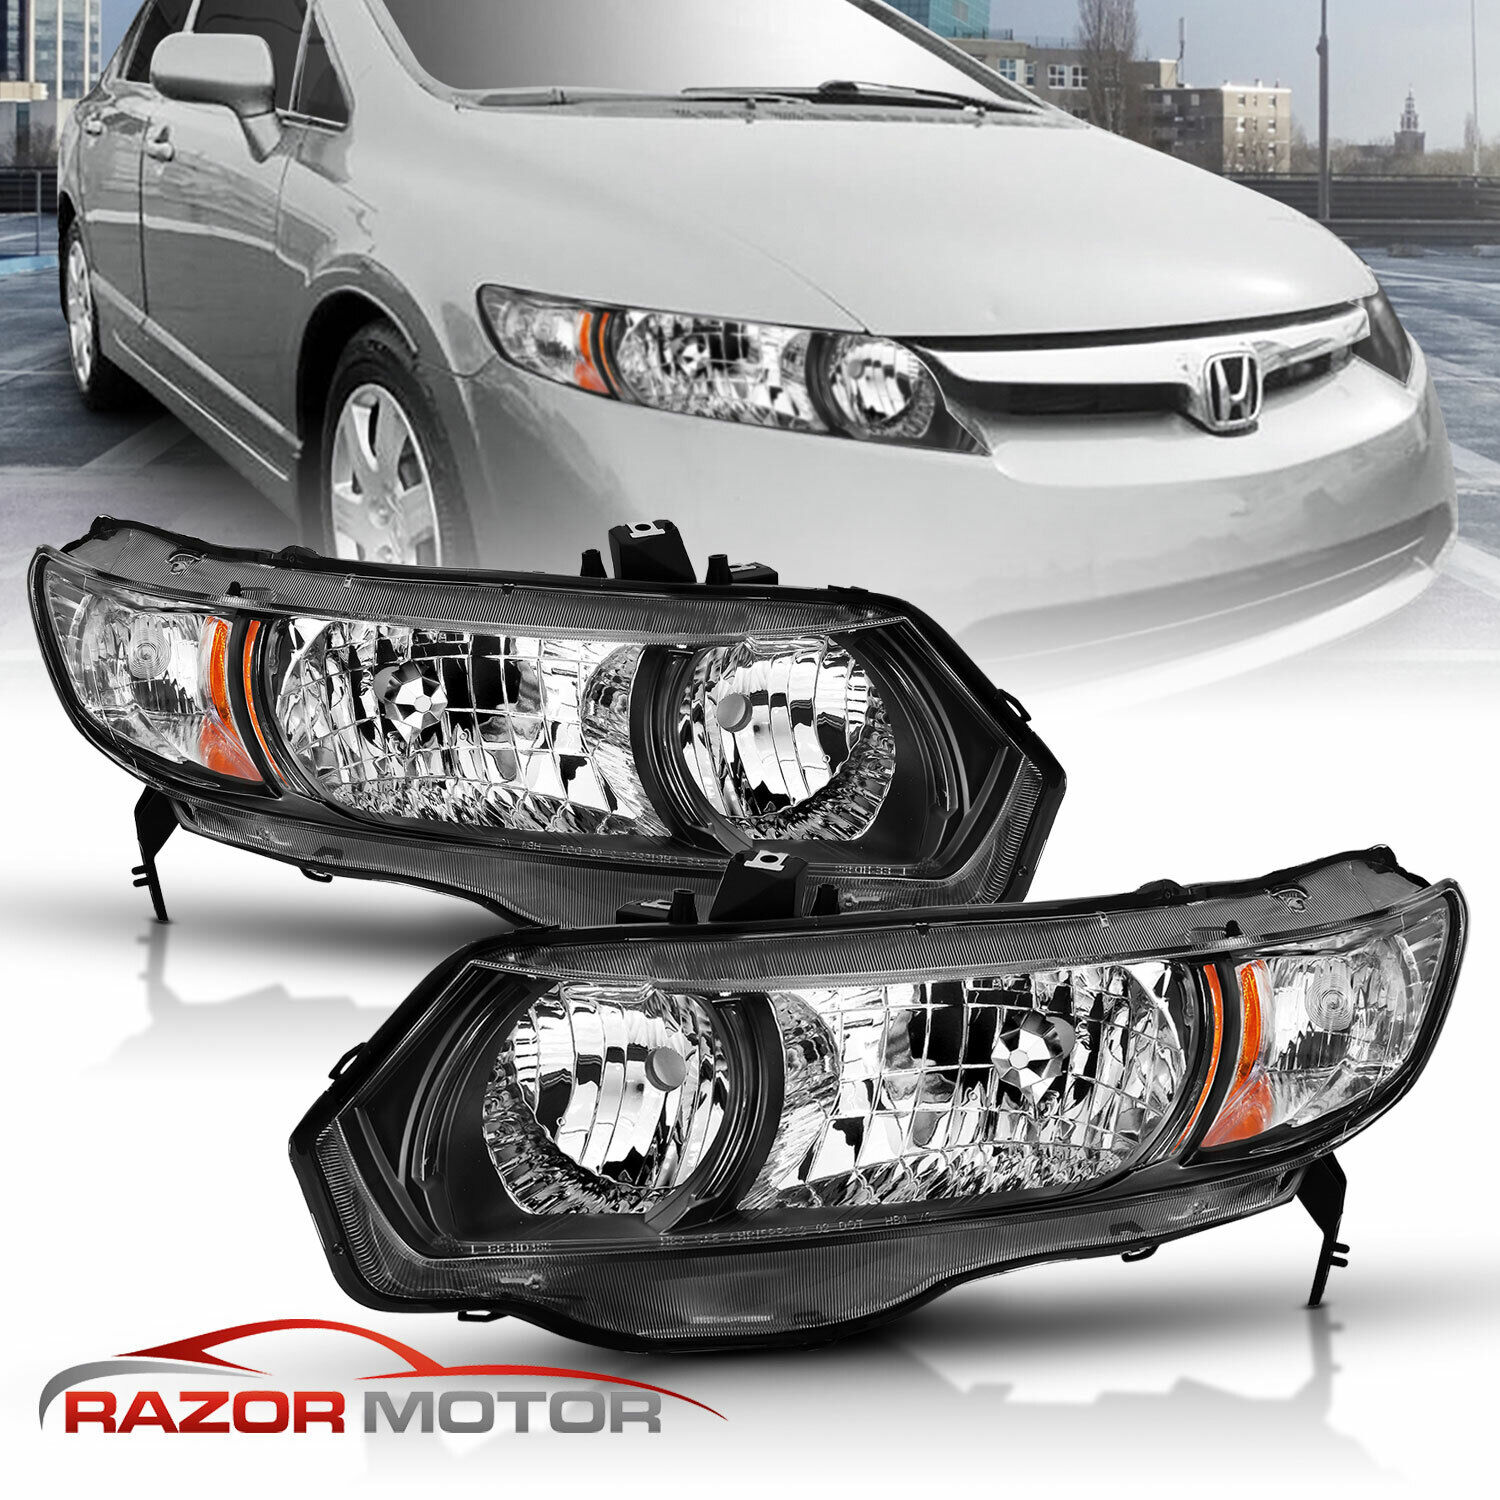 2006-2011 Black Replacement Headlight Pair For Honda Civic 2Dr Coupe Si, DX, LX